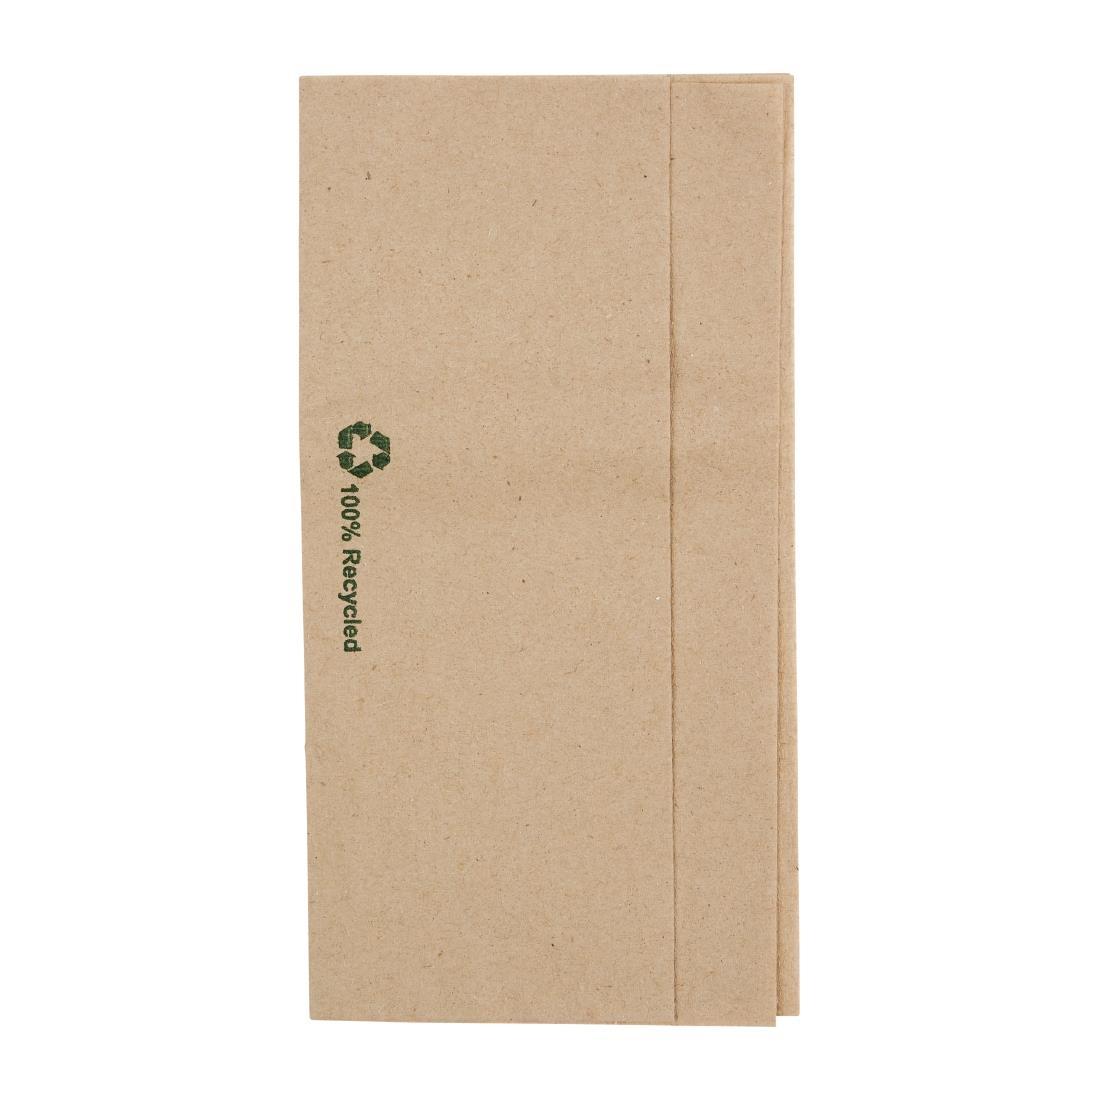 Fiesta Recyclable Recycled Lunch Napkin Kraft 32x30cm 1ply Dispenser Fold (Pack of 6000) - FE211  - 1